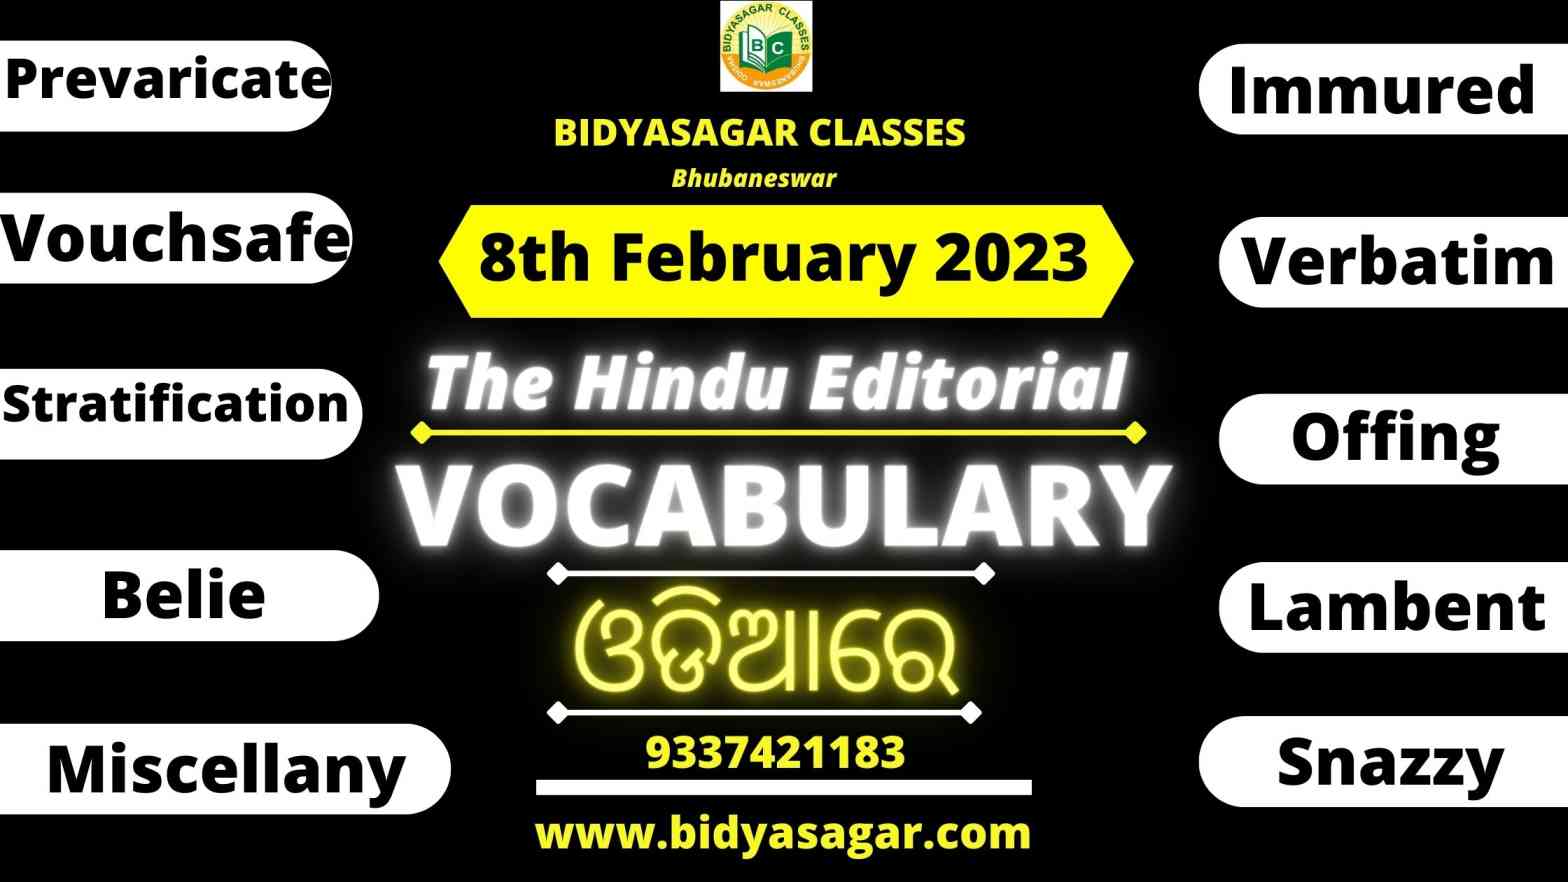 The Hindu Editorial Vocabulary of 8th February 2023